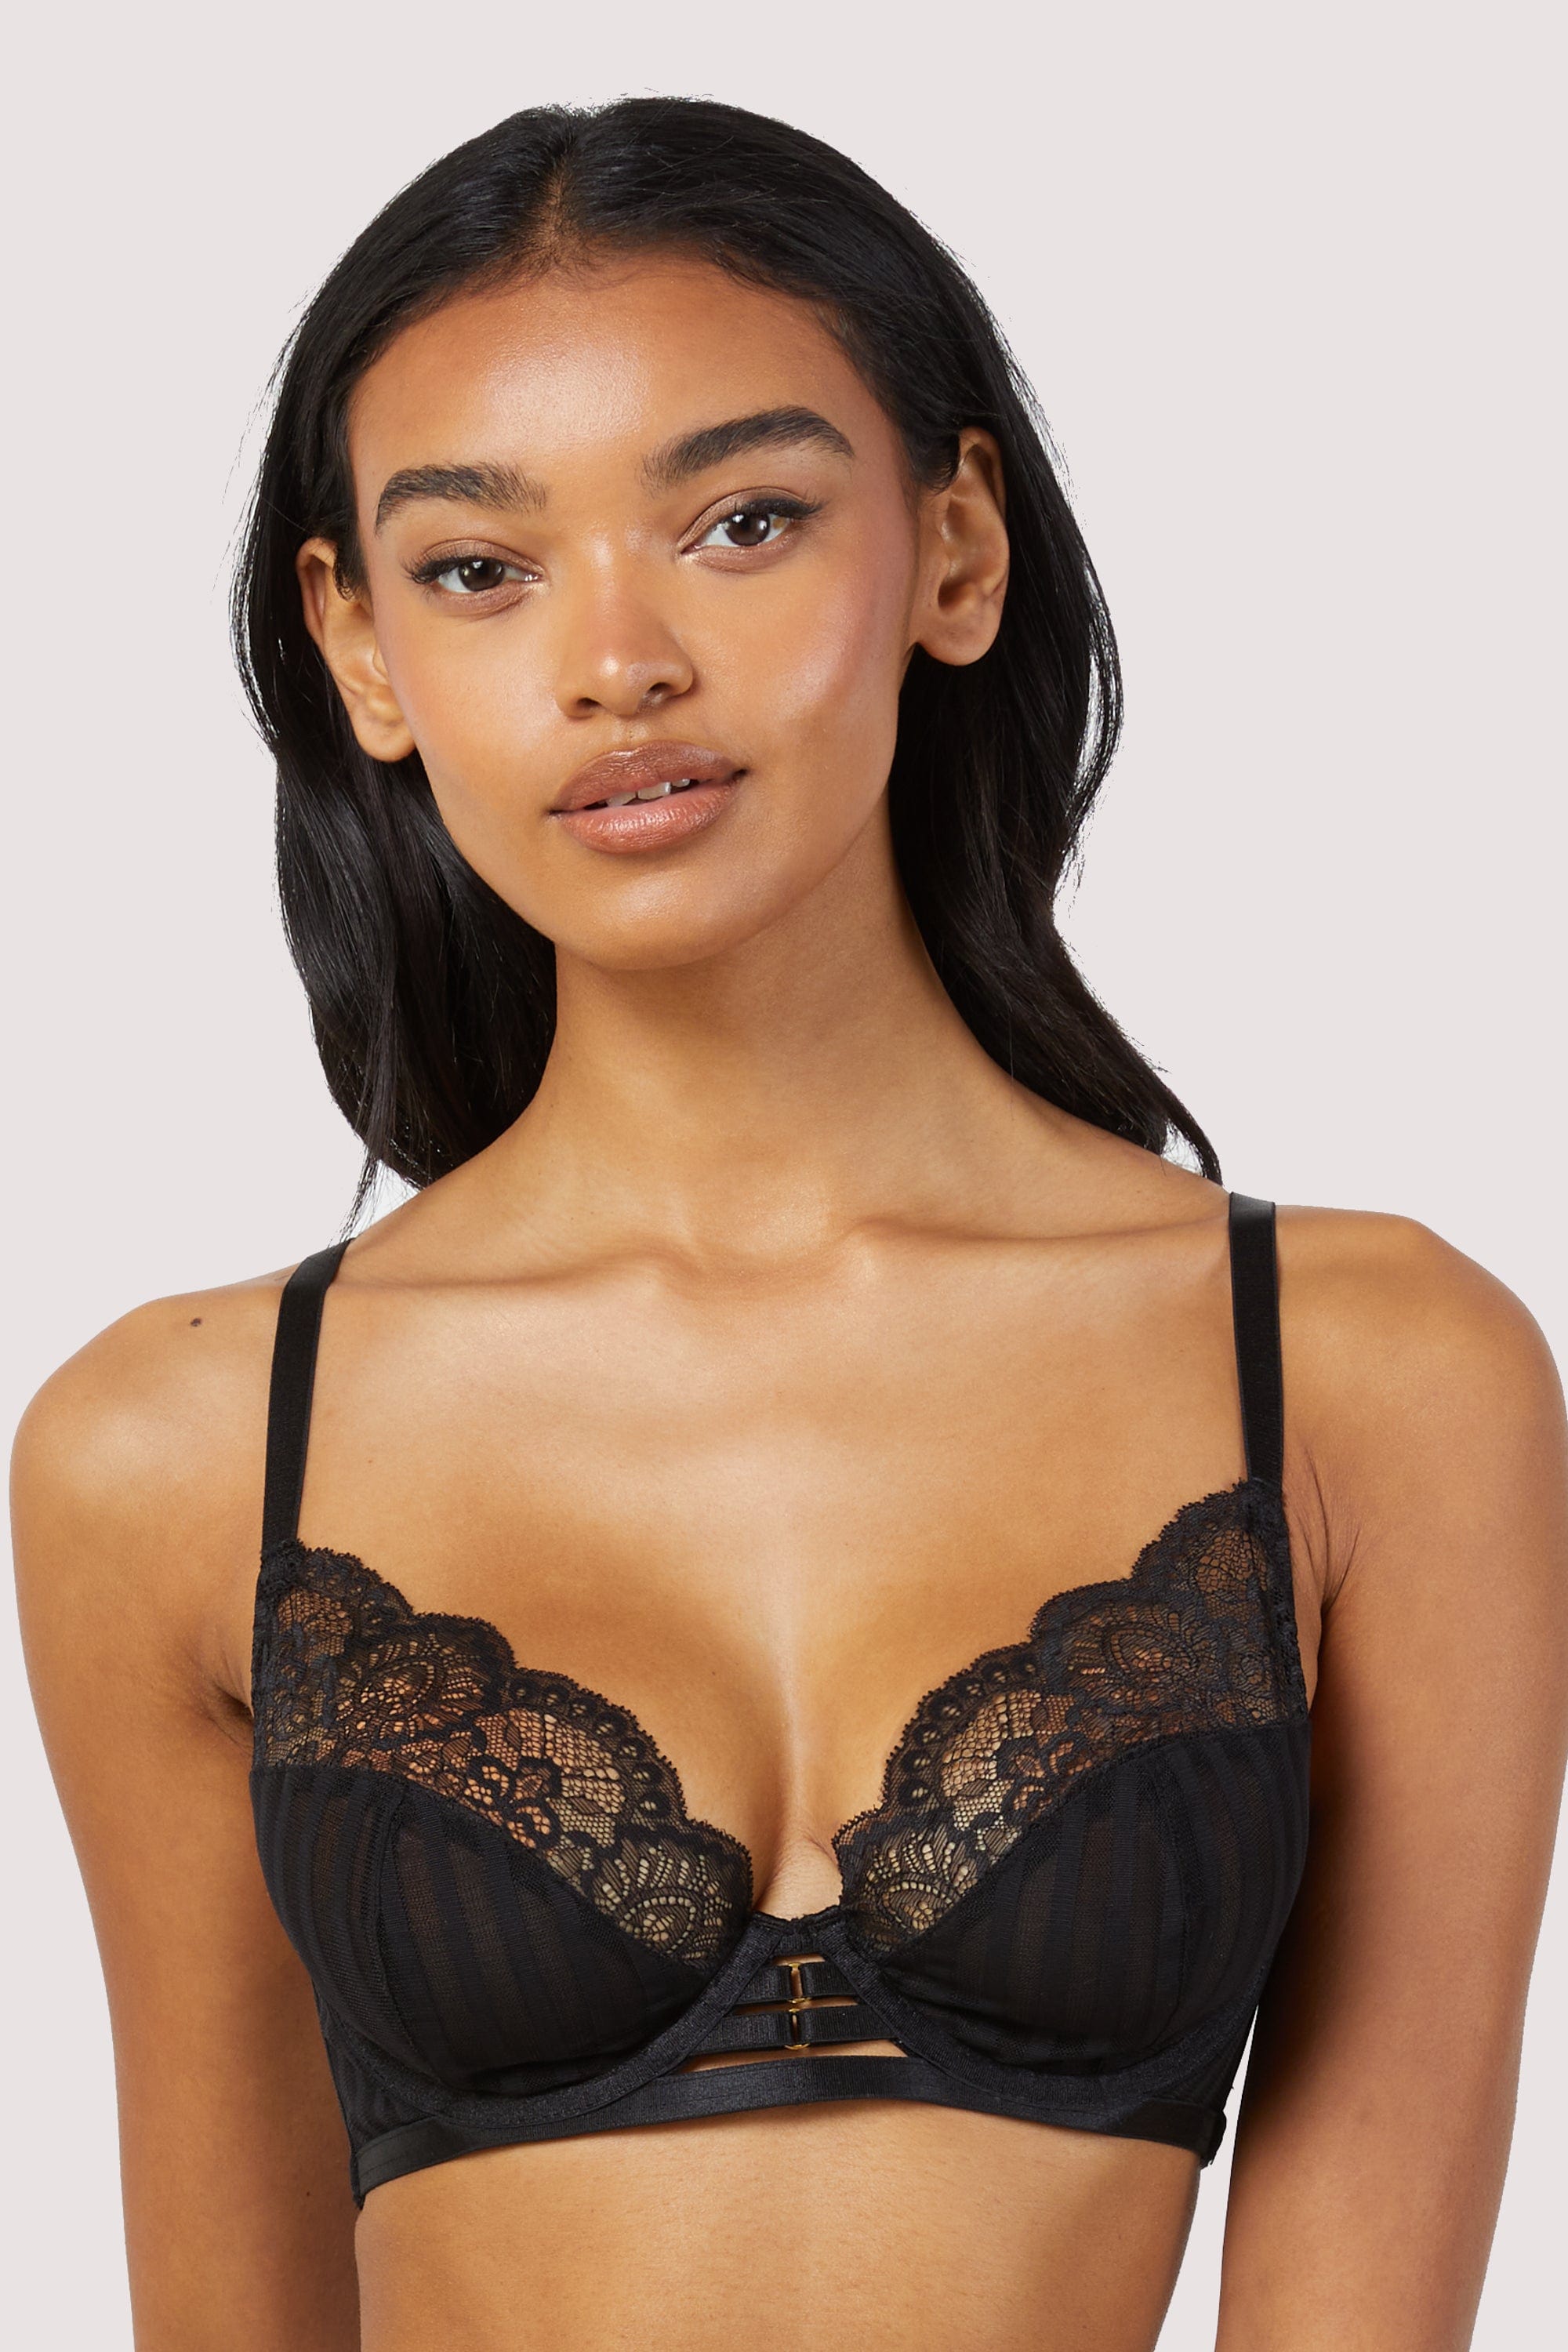 PACT Apparel Women's Black Lace Smooth Cup Bralette 